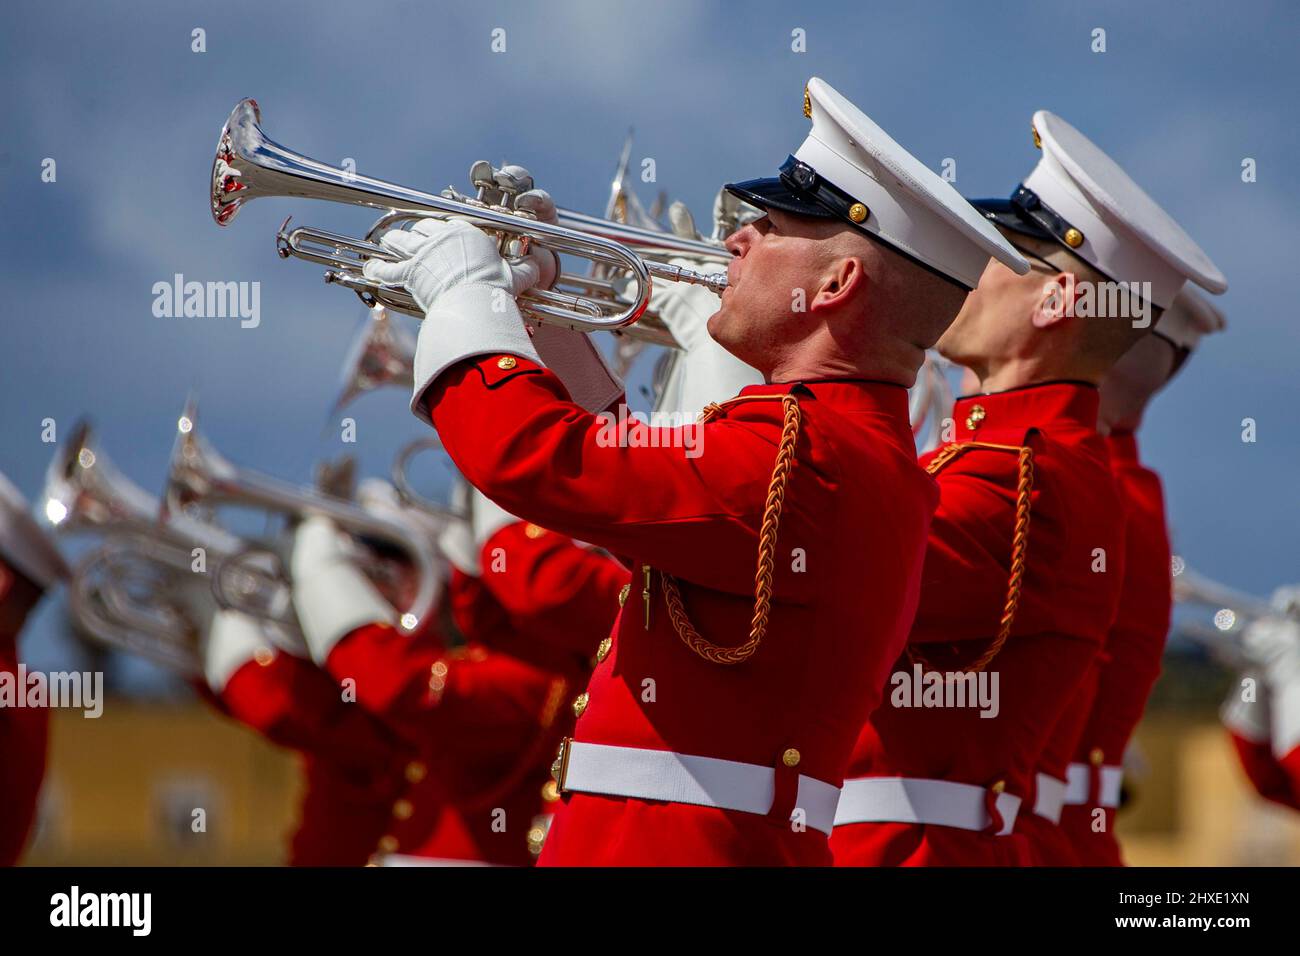 San Diego, California, USA. 5th Mar, 2022. U.S. Marines with Marine Drum and Bugle Corps, Battle Color Detachment, Marine Barracks Washington, DC, perform during the centennial celebration at Marine Corps Recruit Depot (MCRD) San Diego, March 5, 2022. The event commemorates the founding of Marine Corps Recruit Depot San Diego in 1921, and consisted of performances by the U.S. Marine Corps Silent Drill Platoon, the U.S. Marine Drum & Bugle Corps, and a ribbon-cutting ceremony outside of the Command Museum. Credit: U.S. Marines/ZUMA Press Wire Service/ZUMAPRESS.com/Alamy Live News Stock Photo